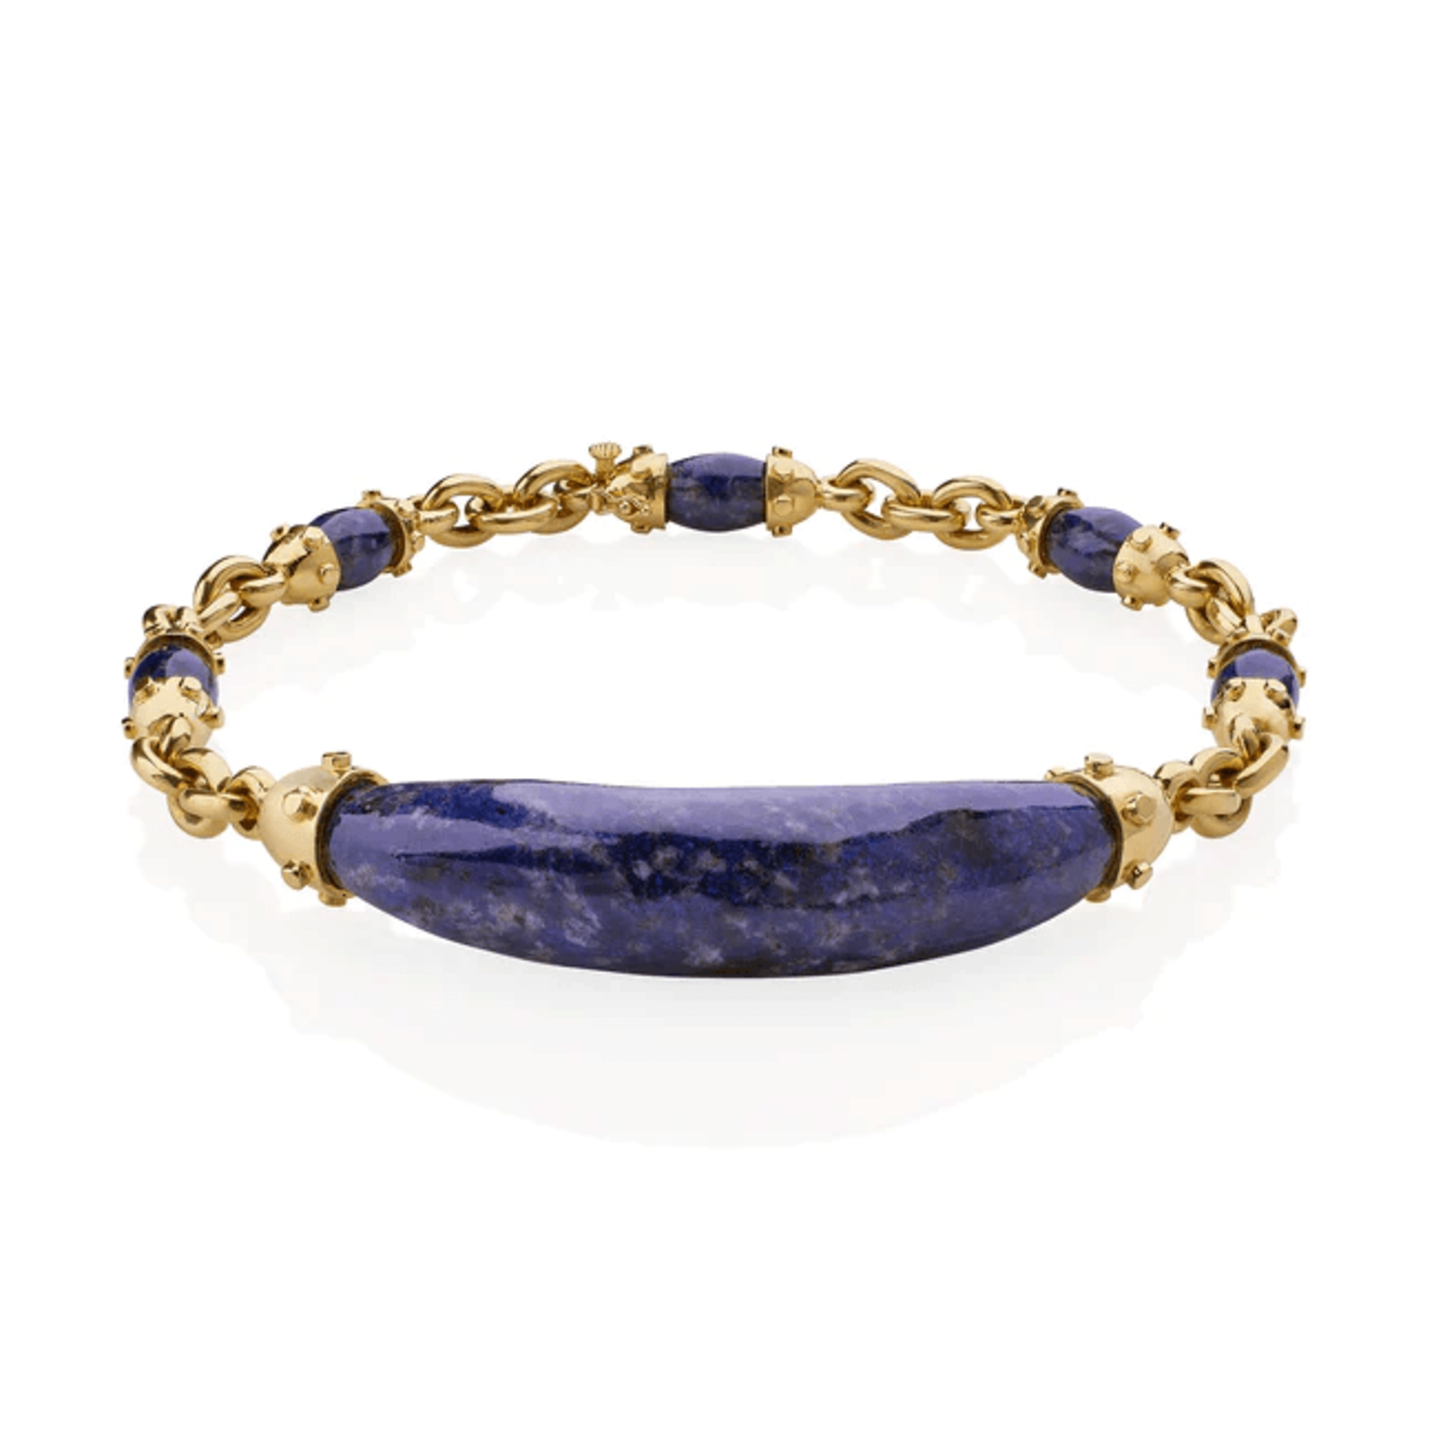 Aldo Cipullo Cartier 1970s 18KT Yellow Gold Sodalite Necklace front